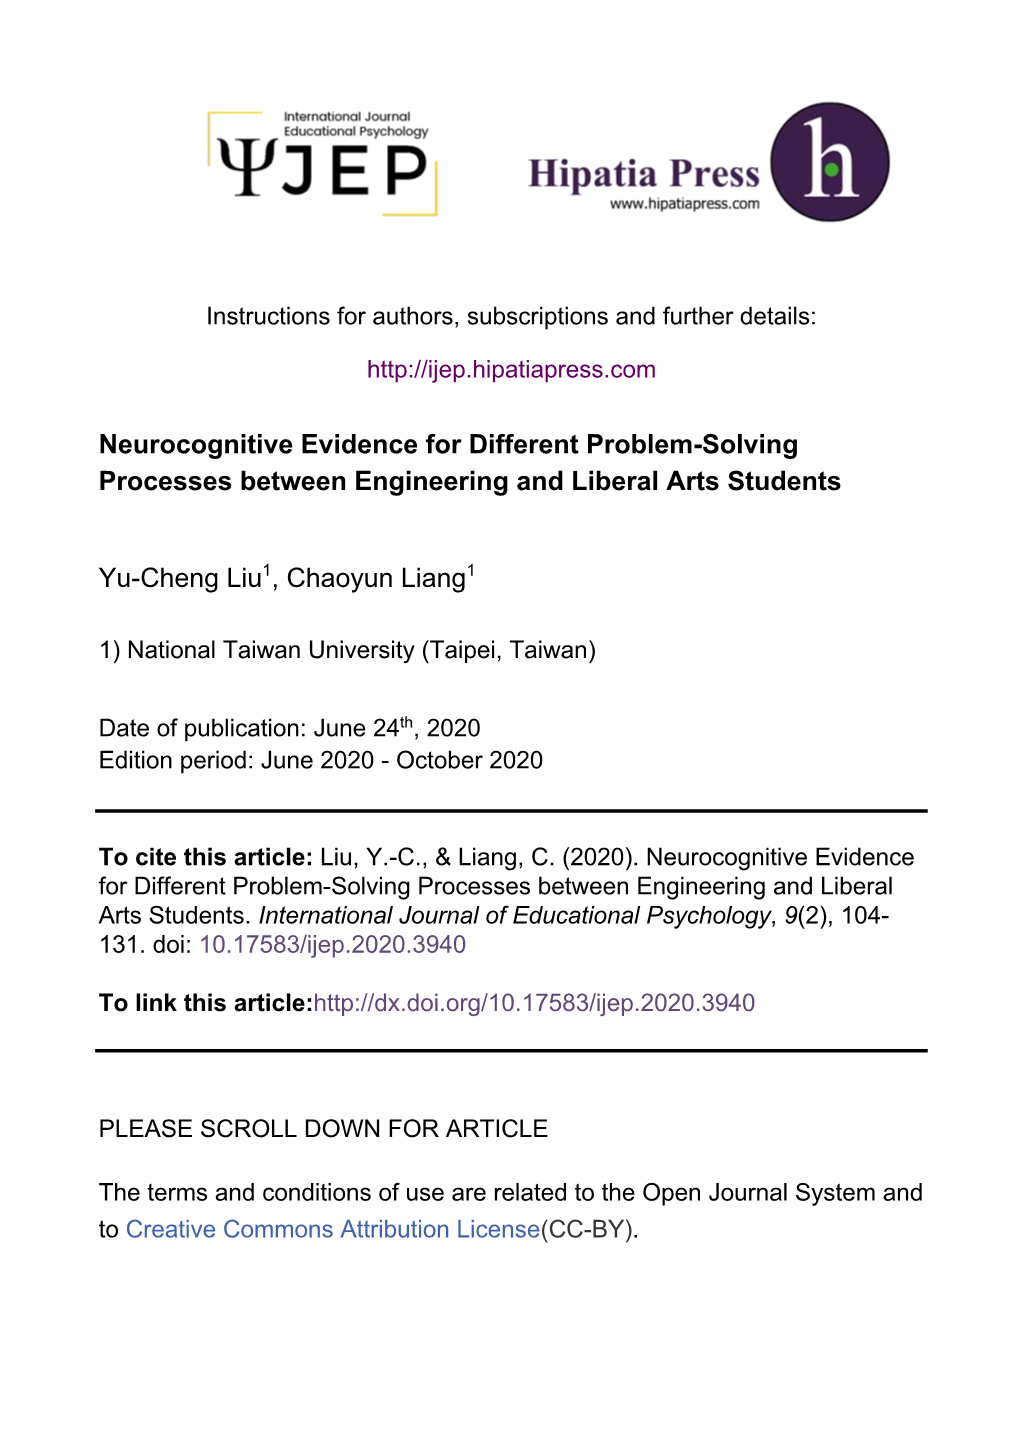 Neurocognitive Evidence for Different Problem-Solving Processes Between Engineering and Liberal Arts Students Yu-Cheng Liu1